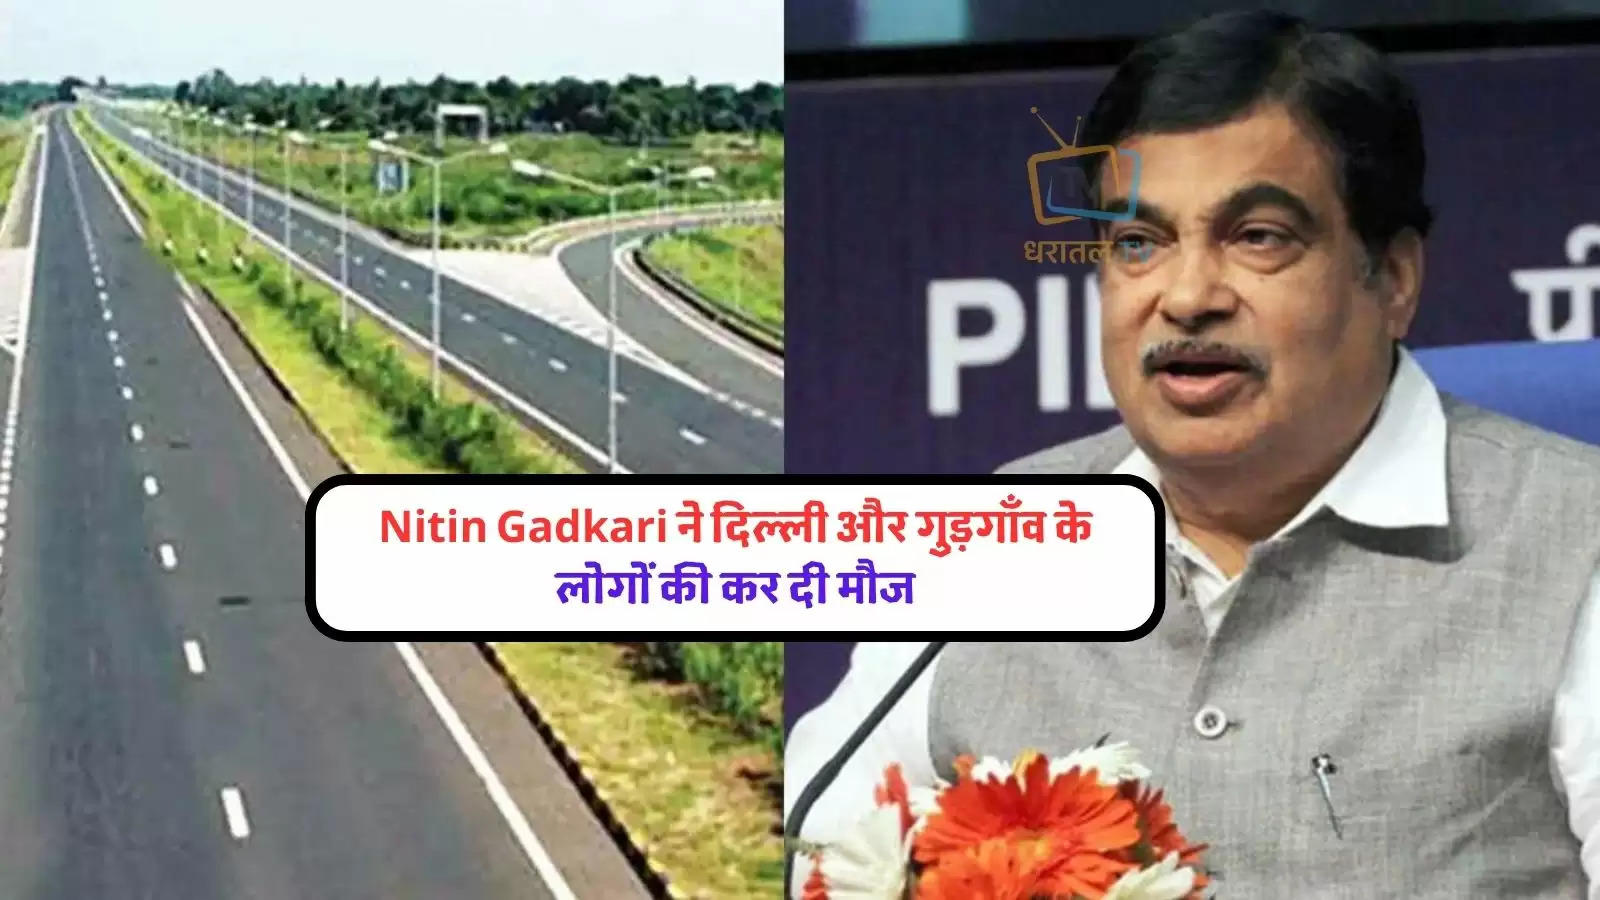 union-transport-minister-nitin-gadkari-said-dwarka-expressway-likely-to-be-completed-soon-connect-gurgaon